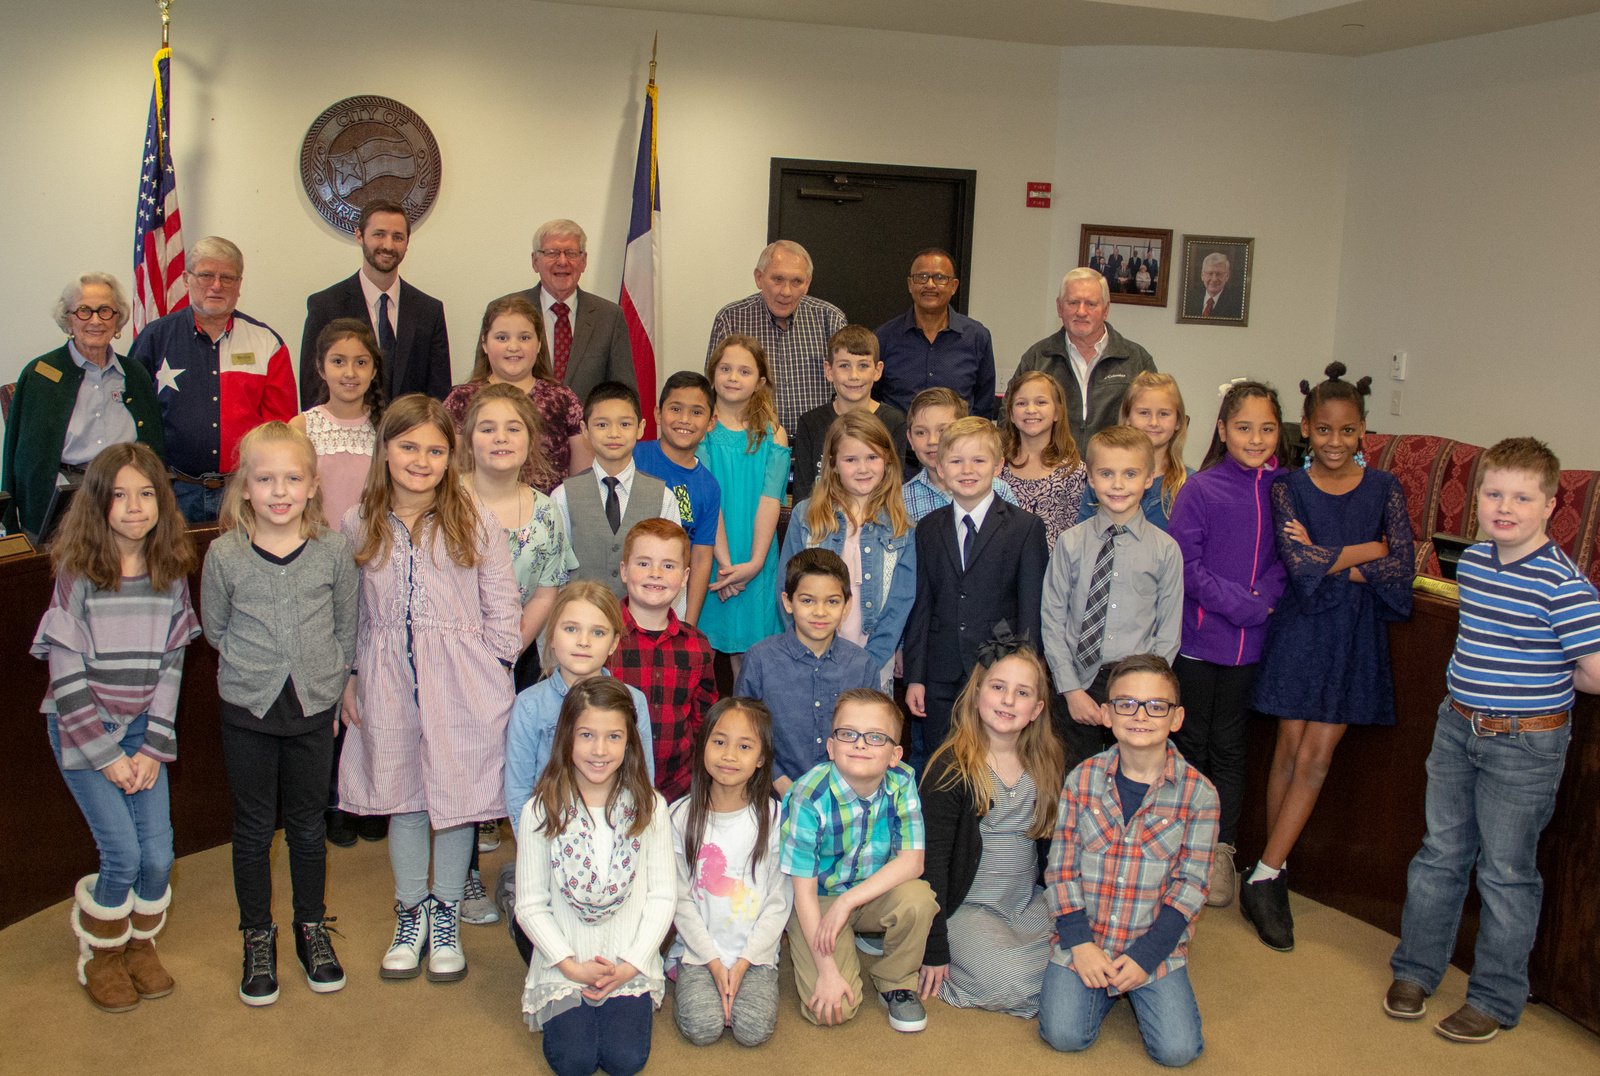 3rd graders from Alton Elementary attend a special City Council Session